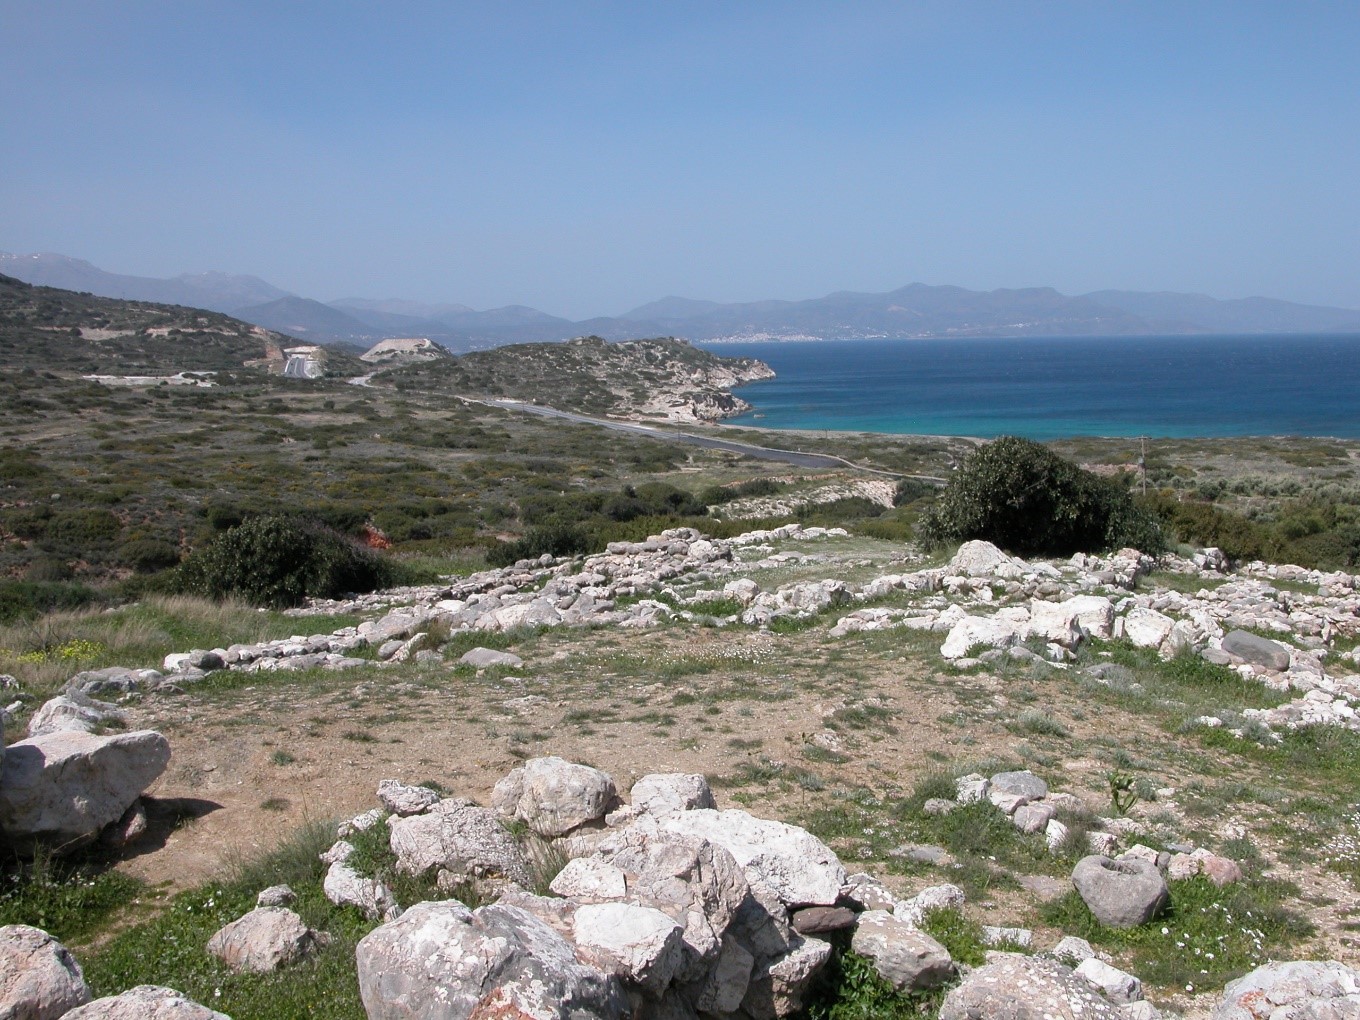 Eastern Crete from the Minoan site of Gournia